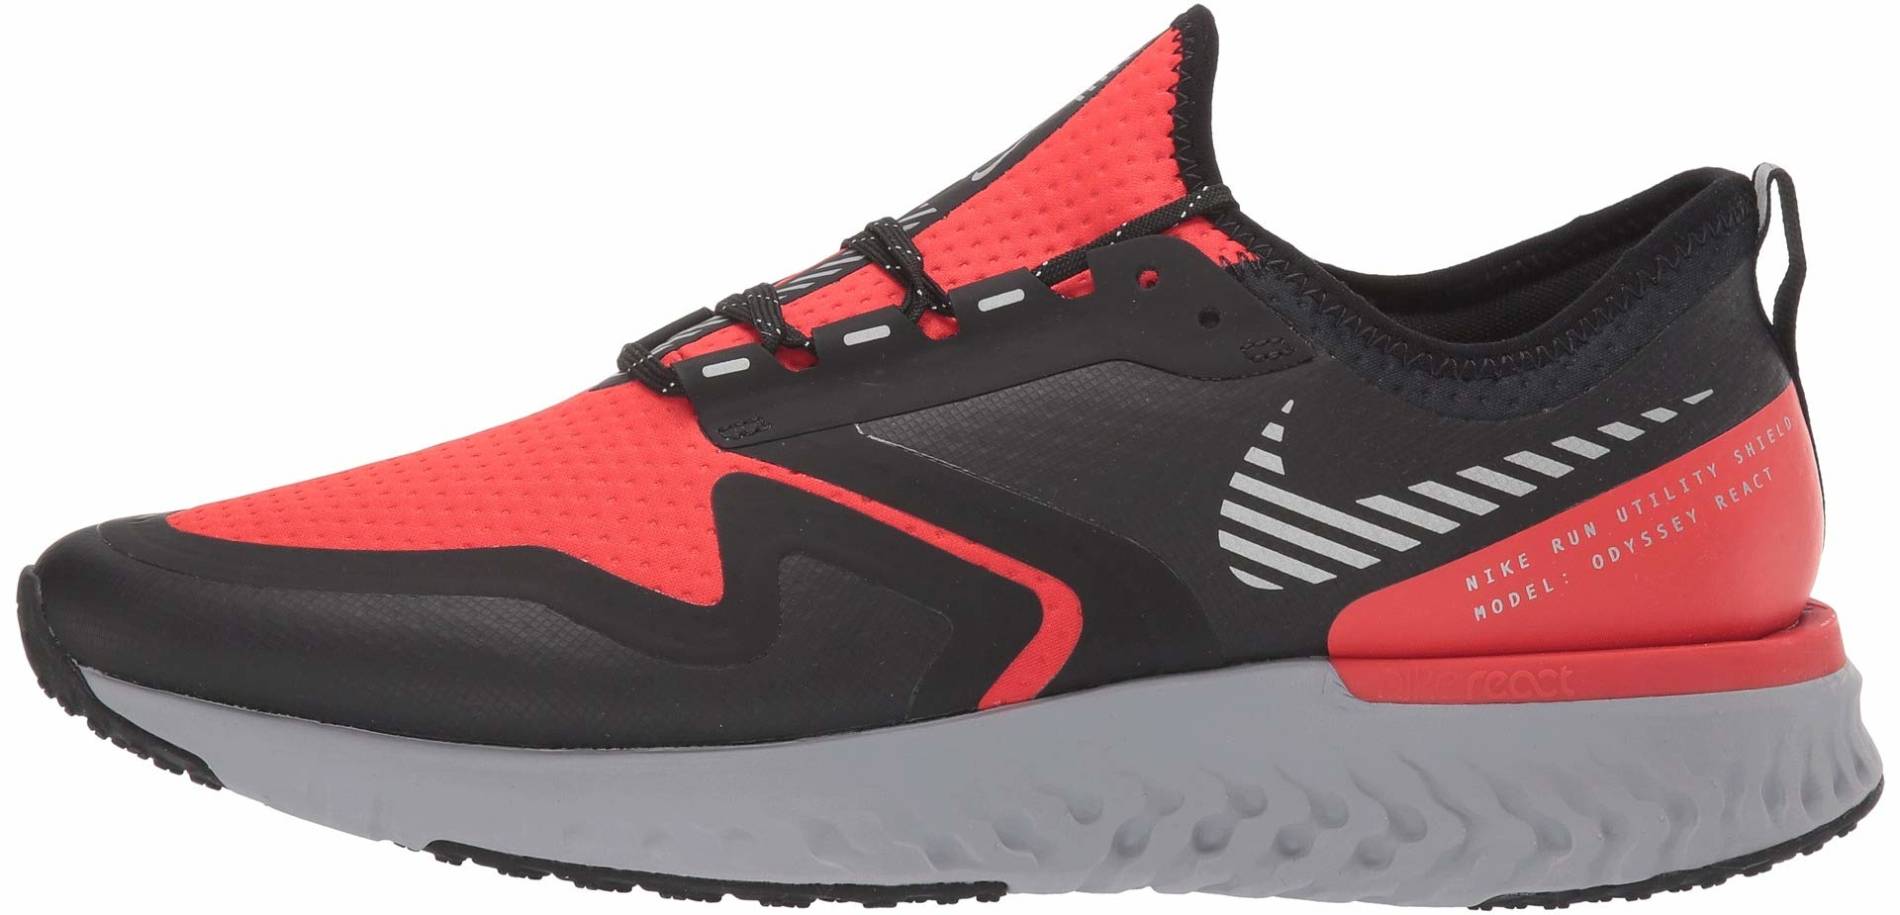 Save 37% on Red Nike Running Shoes (31 